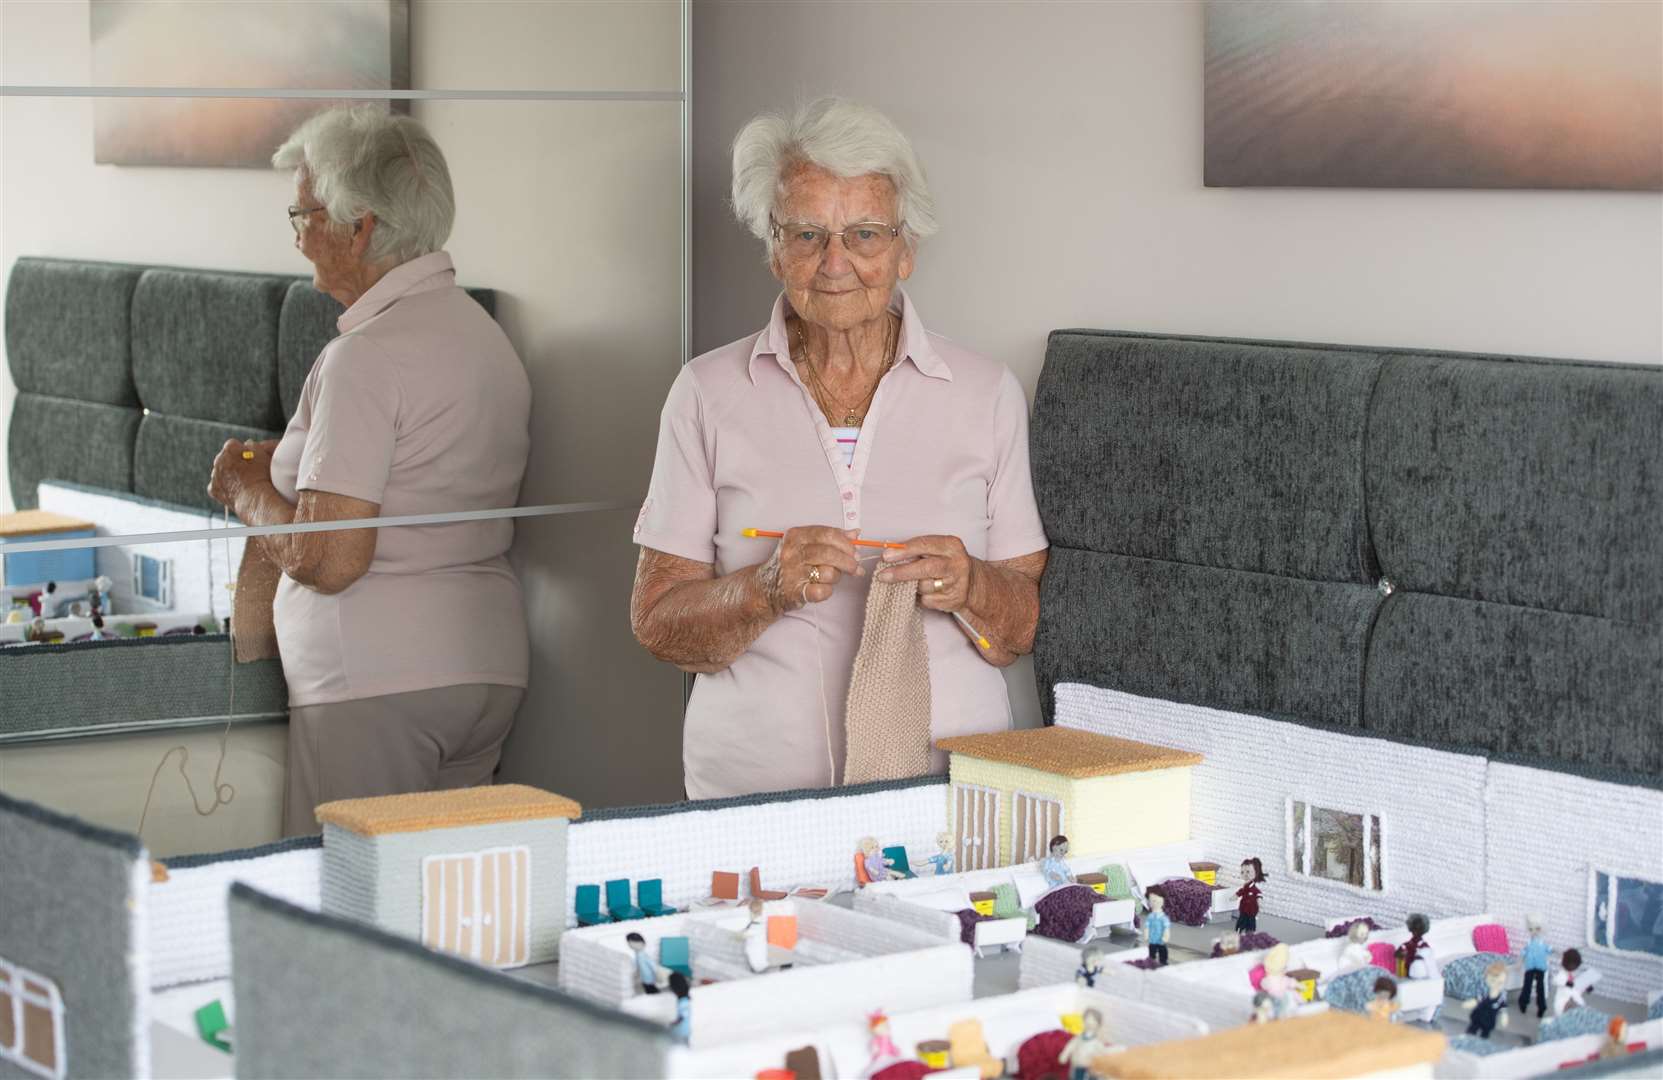 Margaret Seaman with her model of the Knittingale Hospital, which she has created to raise funds for the NHS (Joe Giddens/ PA)